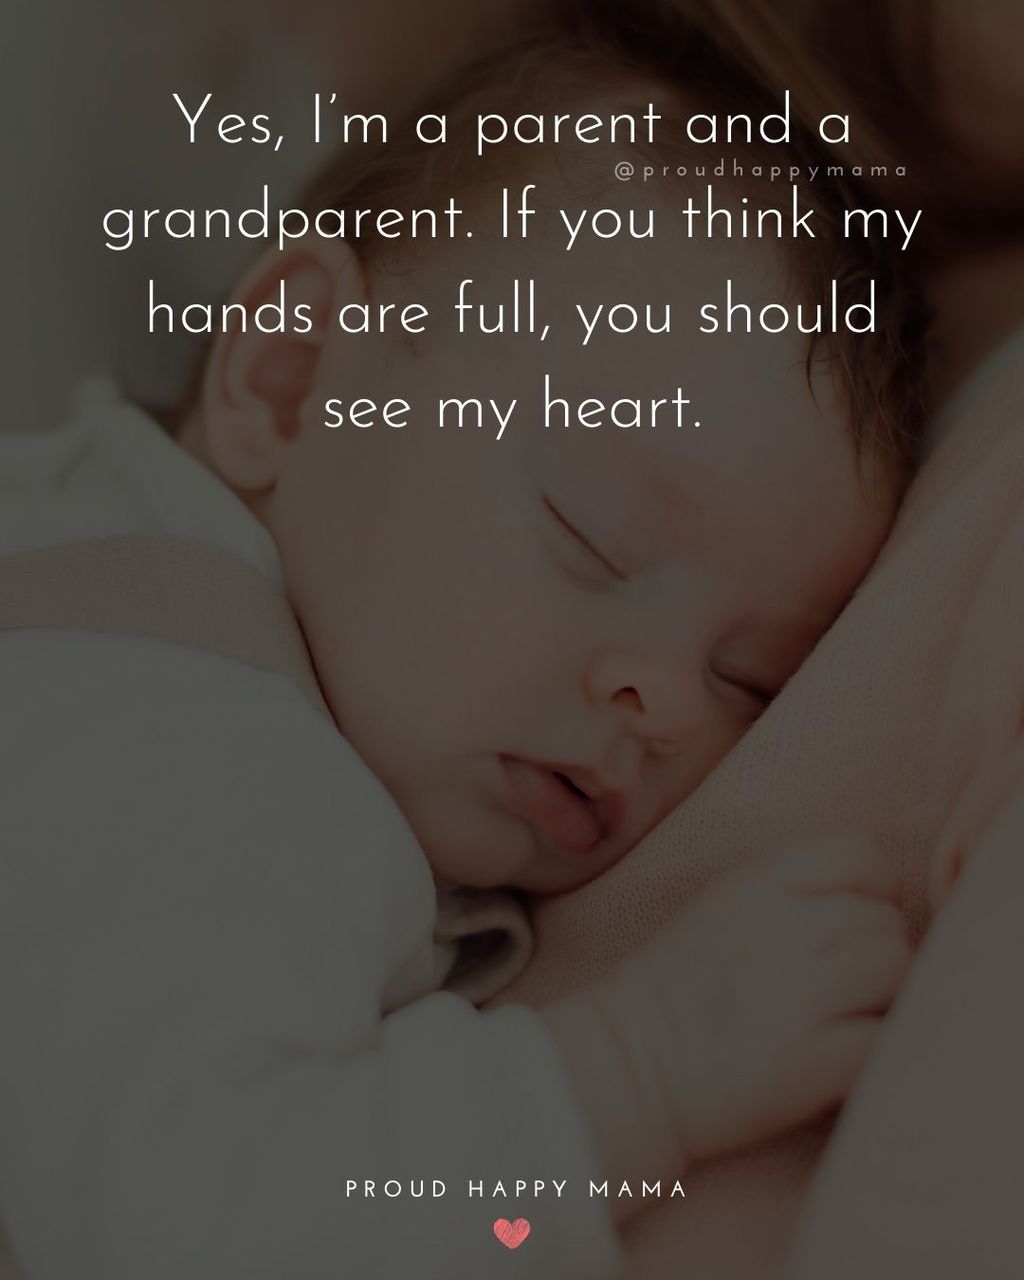 Love For Grandparents Quotes | Yes, I’m a parent and a grandparent. If you think my hands are full, you should see my heart.